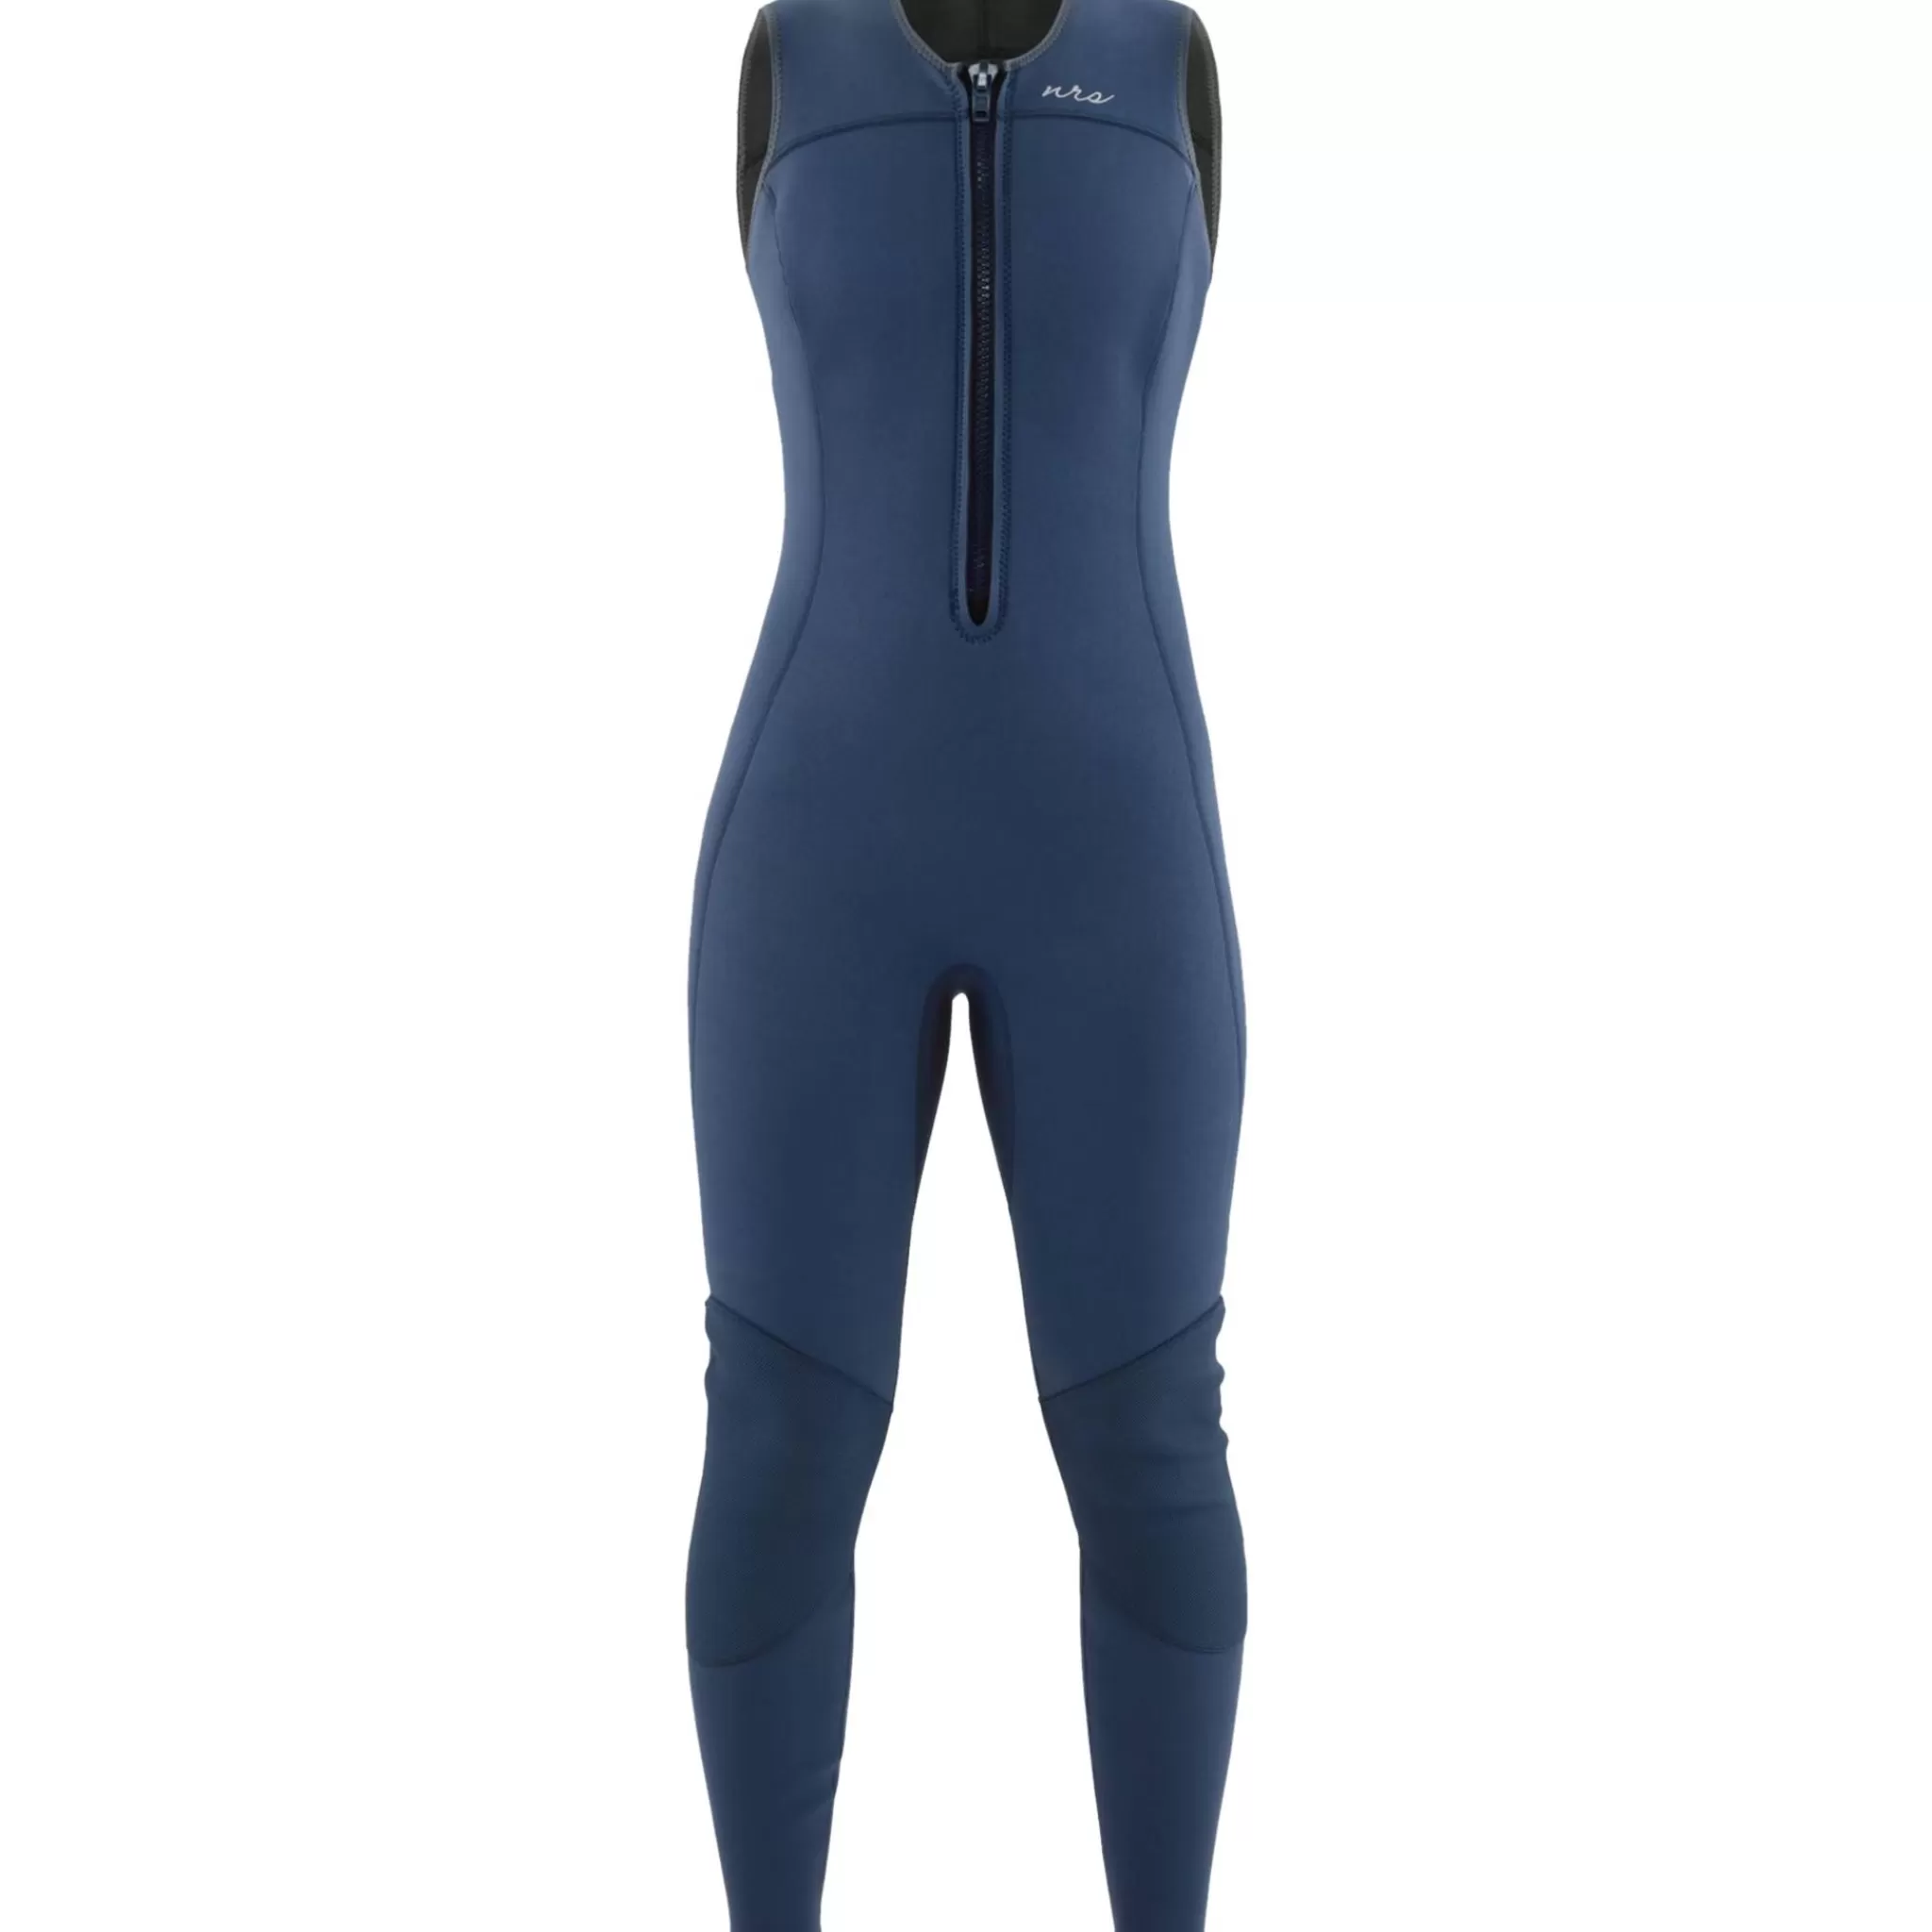 Discount NRS W'S 3.0 Ignitor Wetsuit, Vatdrakt Dame